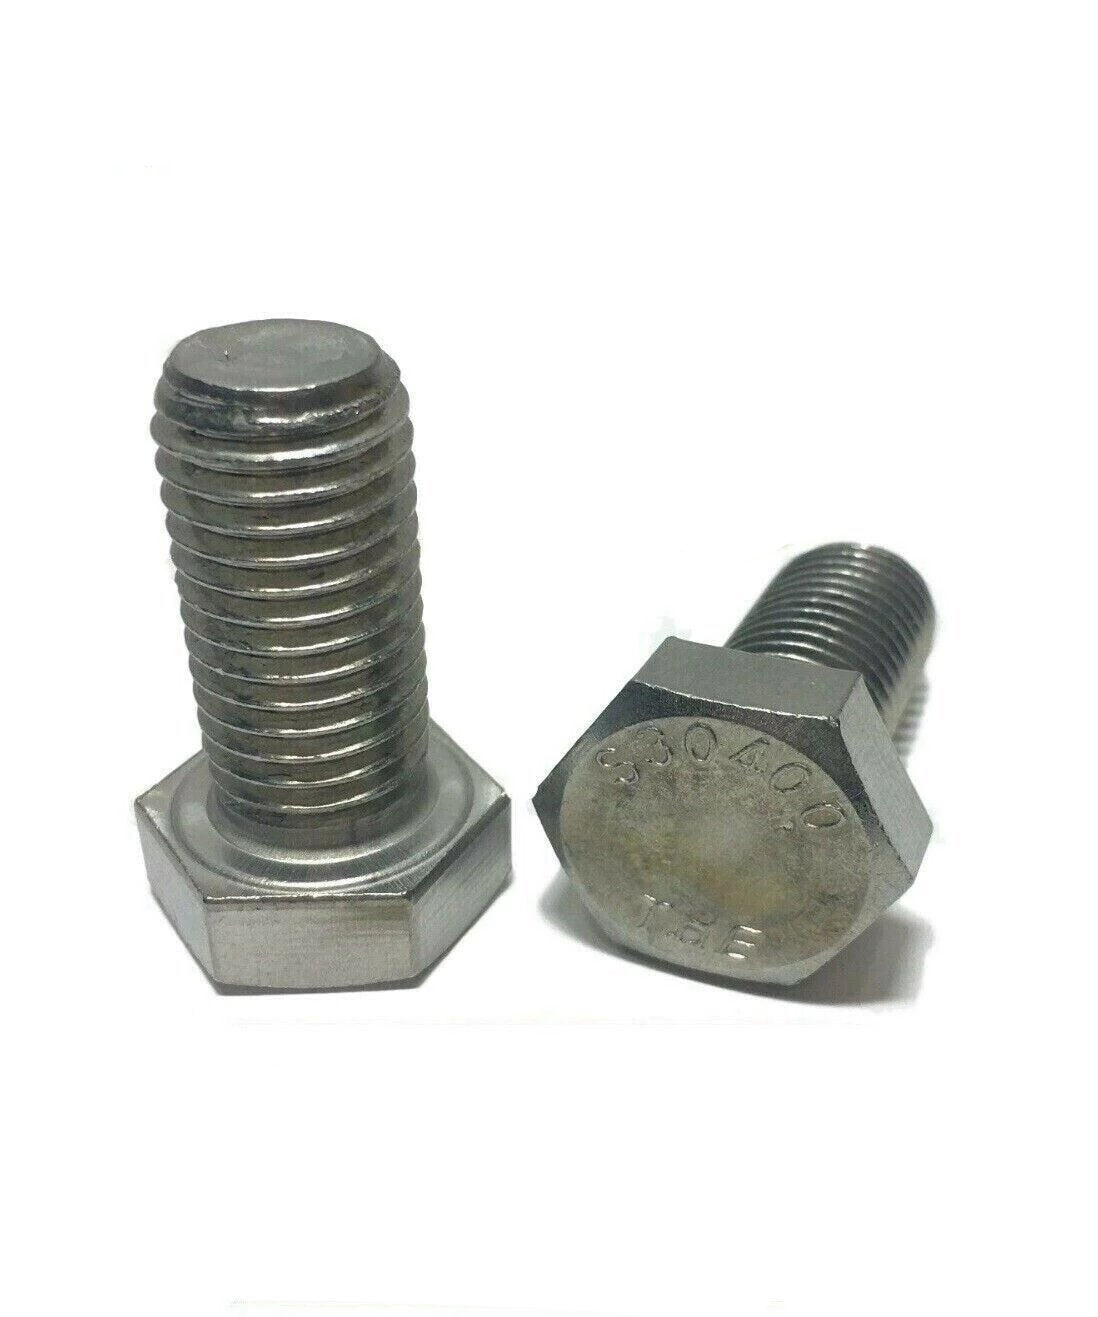 7/16"-14 x 1-1/2" StaInless Steel Hex Cap Screw / Tap Bolt 18-8 / 304